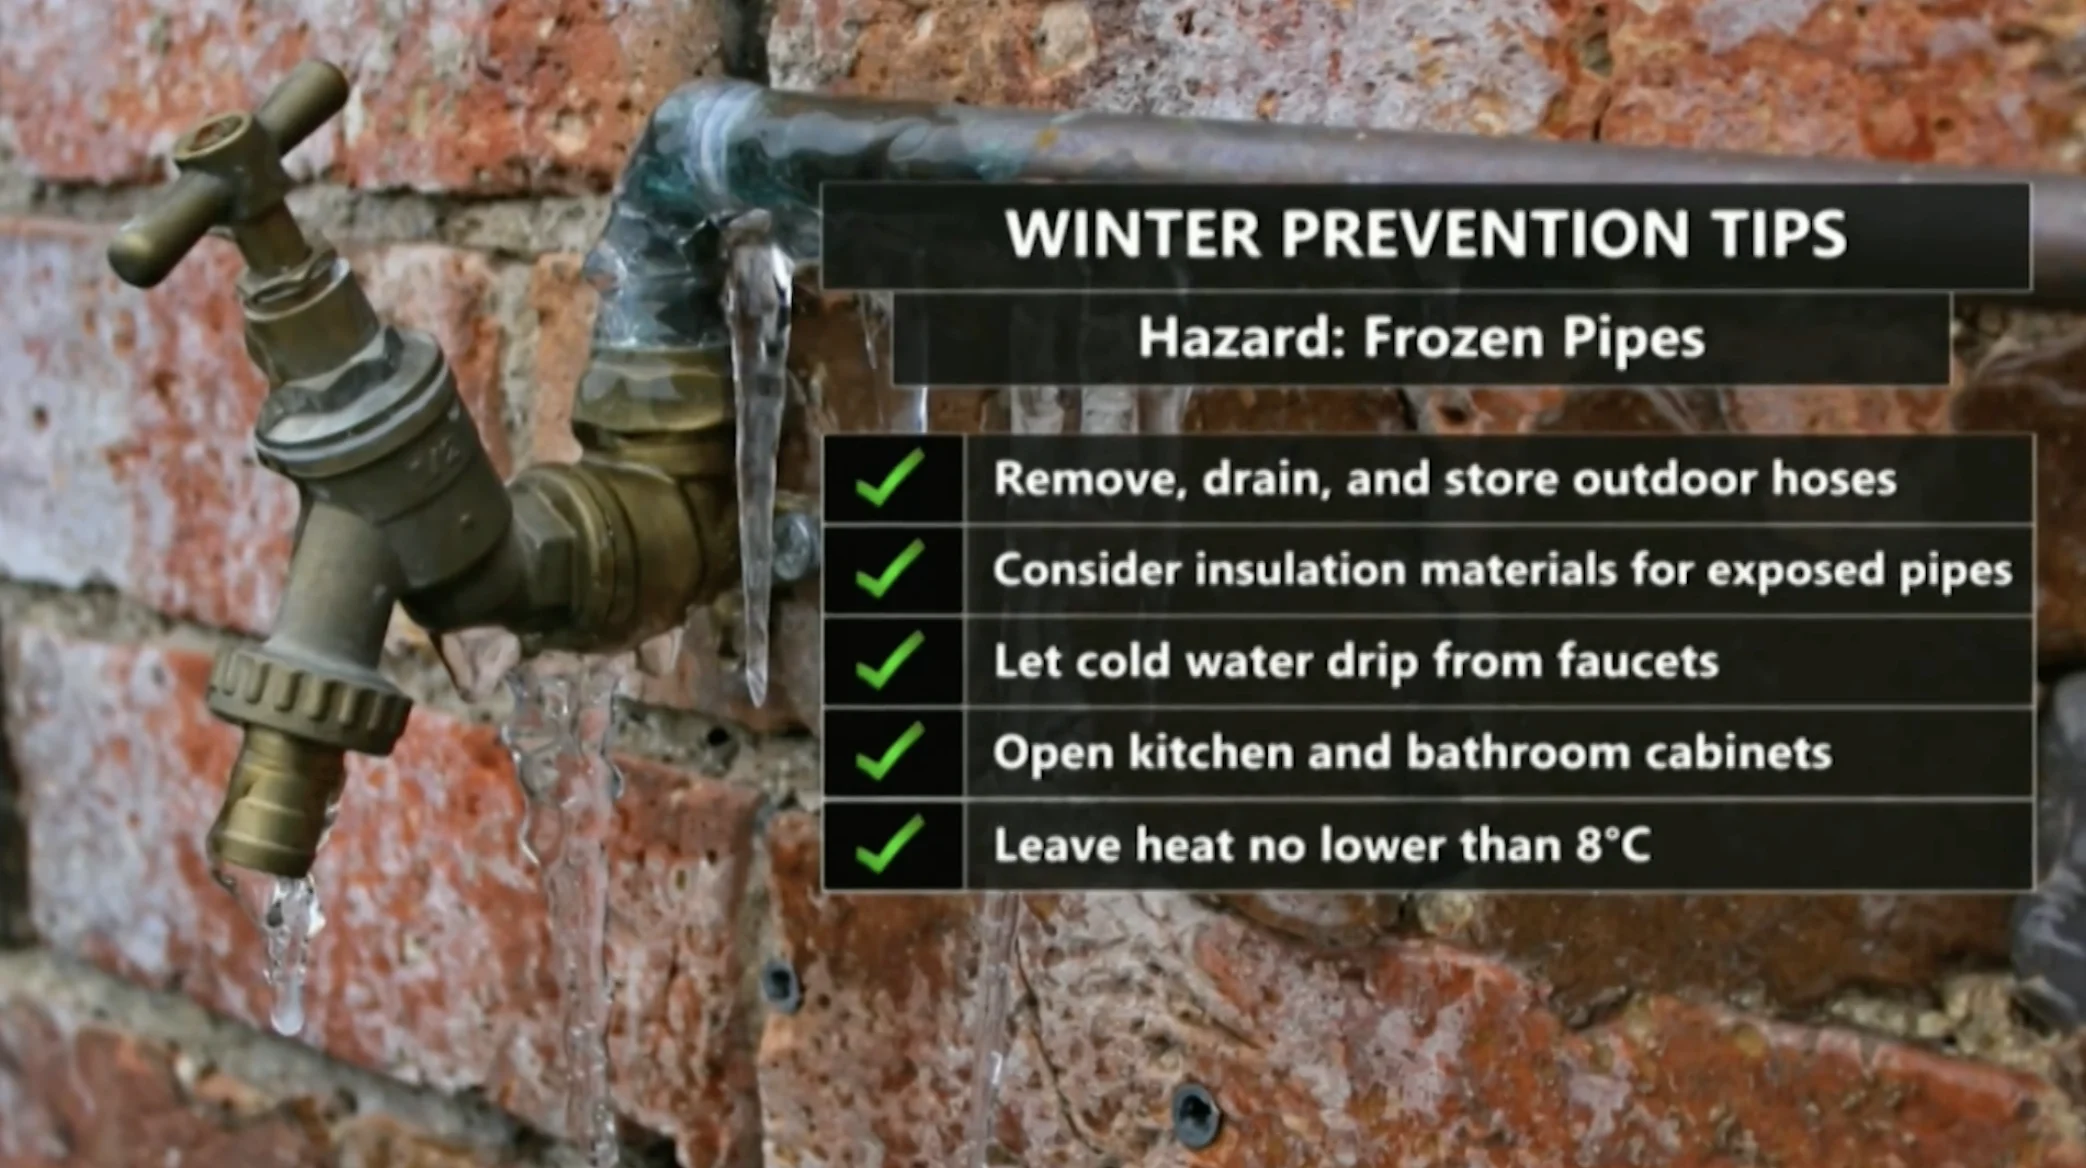 EXPLAINER: Cold weather frozen pipe protection tips